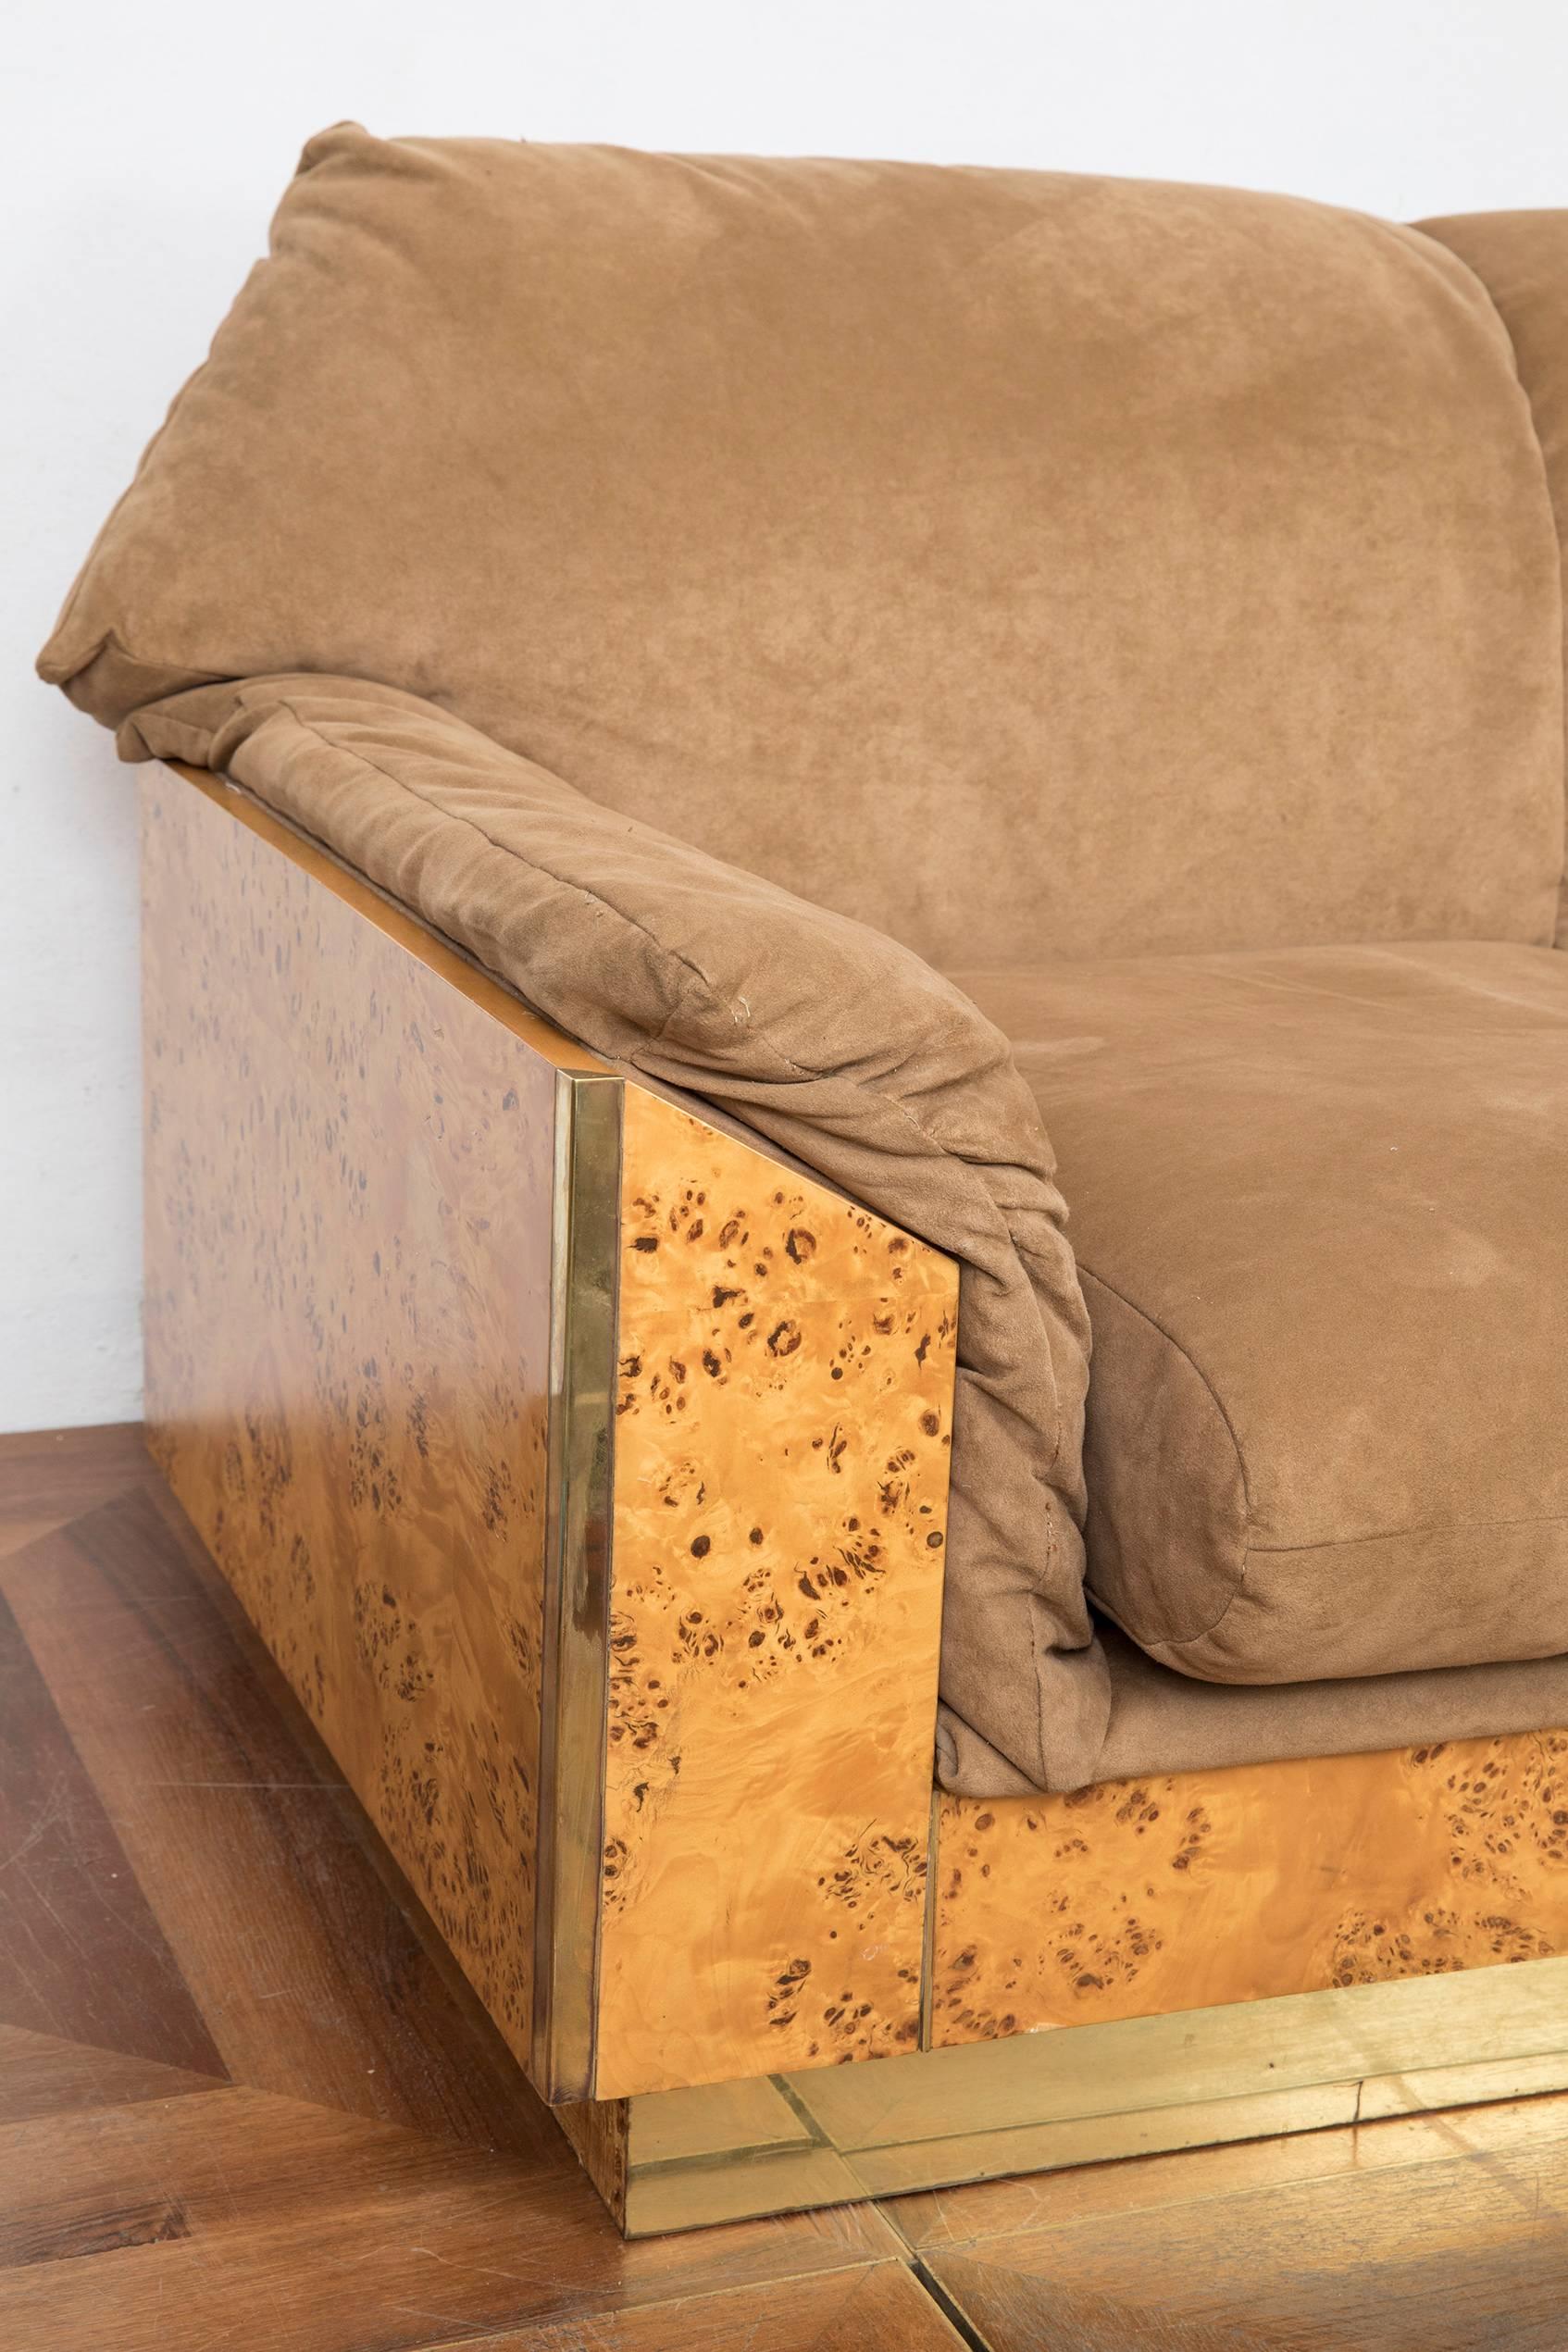 Extremely rare thuja burl and suede sofa designed by Willy Rizzo in the early 1970s for Mario Sabot.

